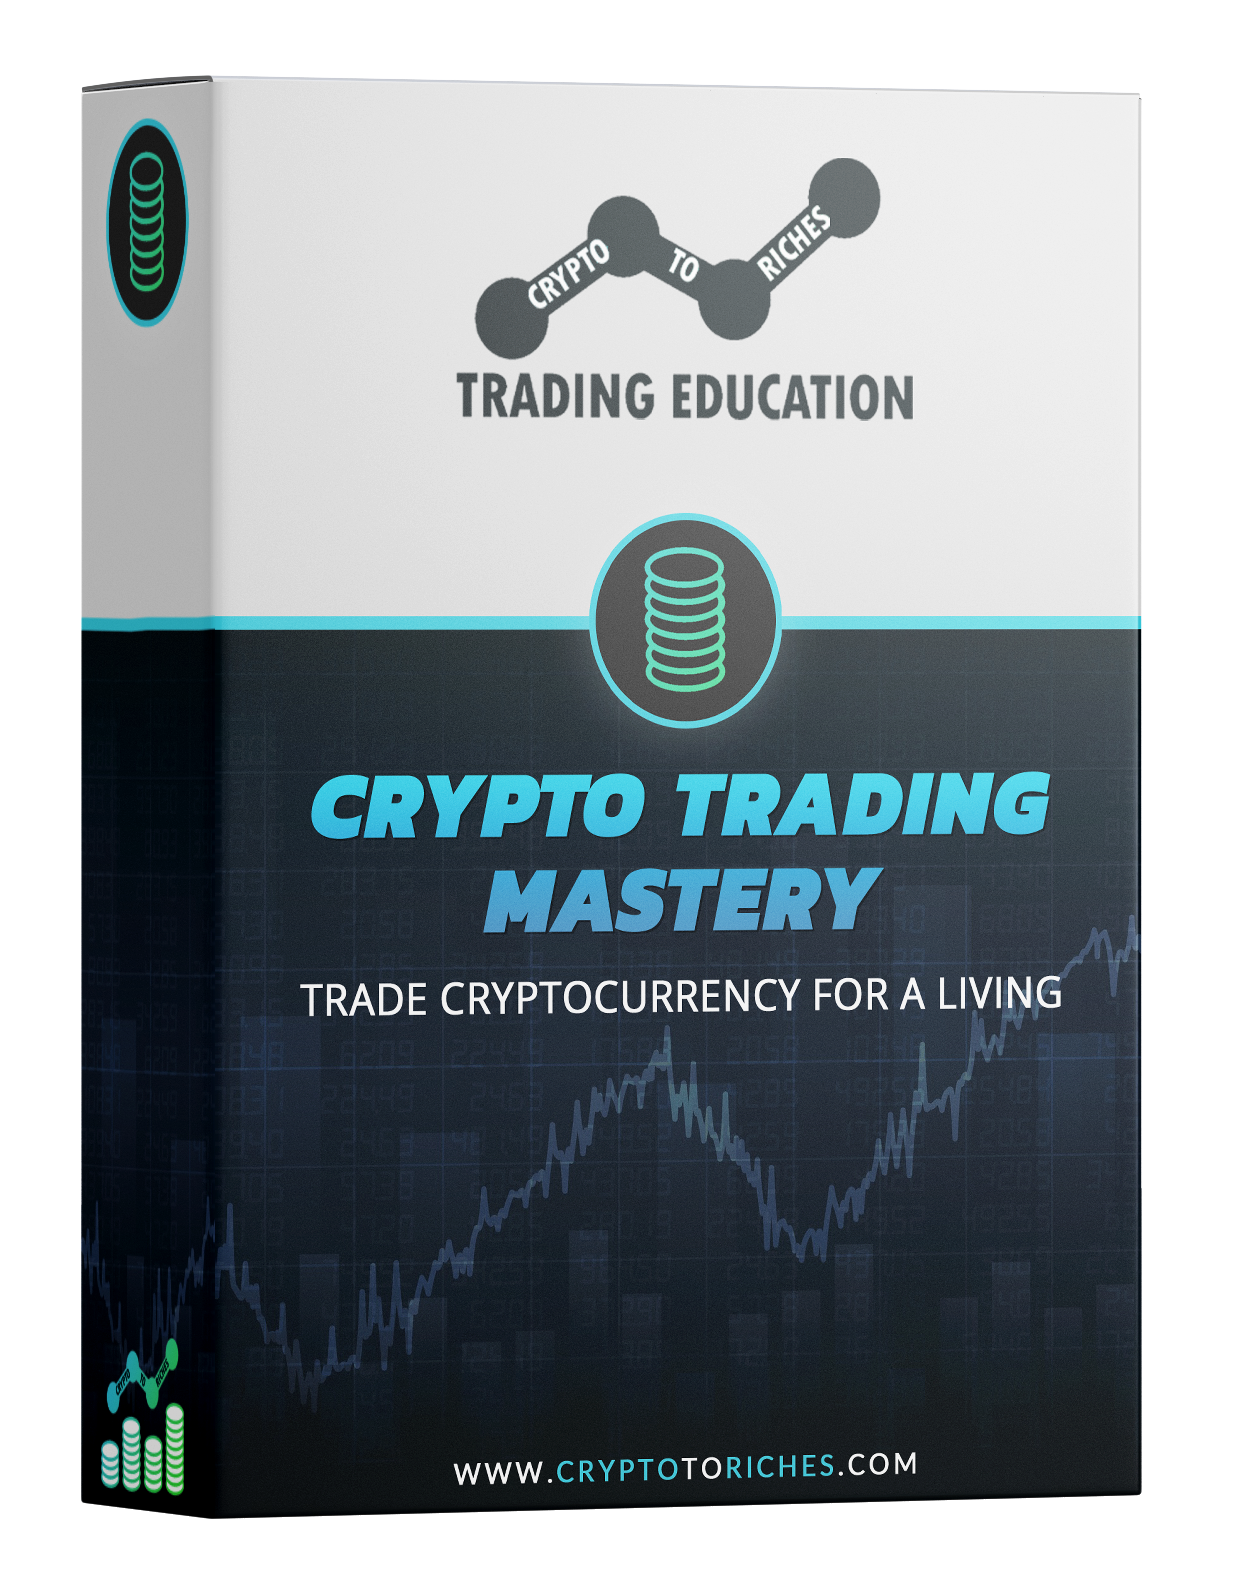 Crypto Trading Mastery by Crypto to Riches